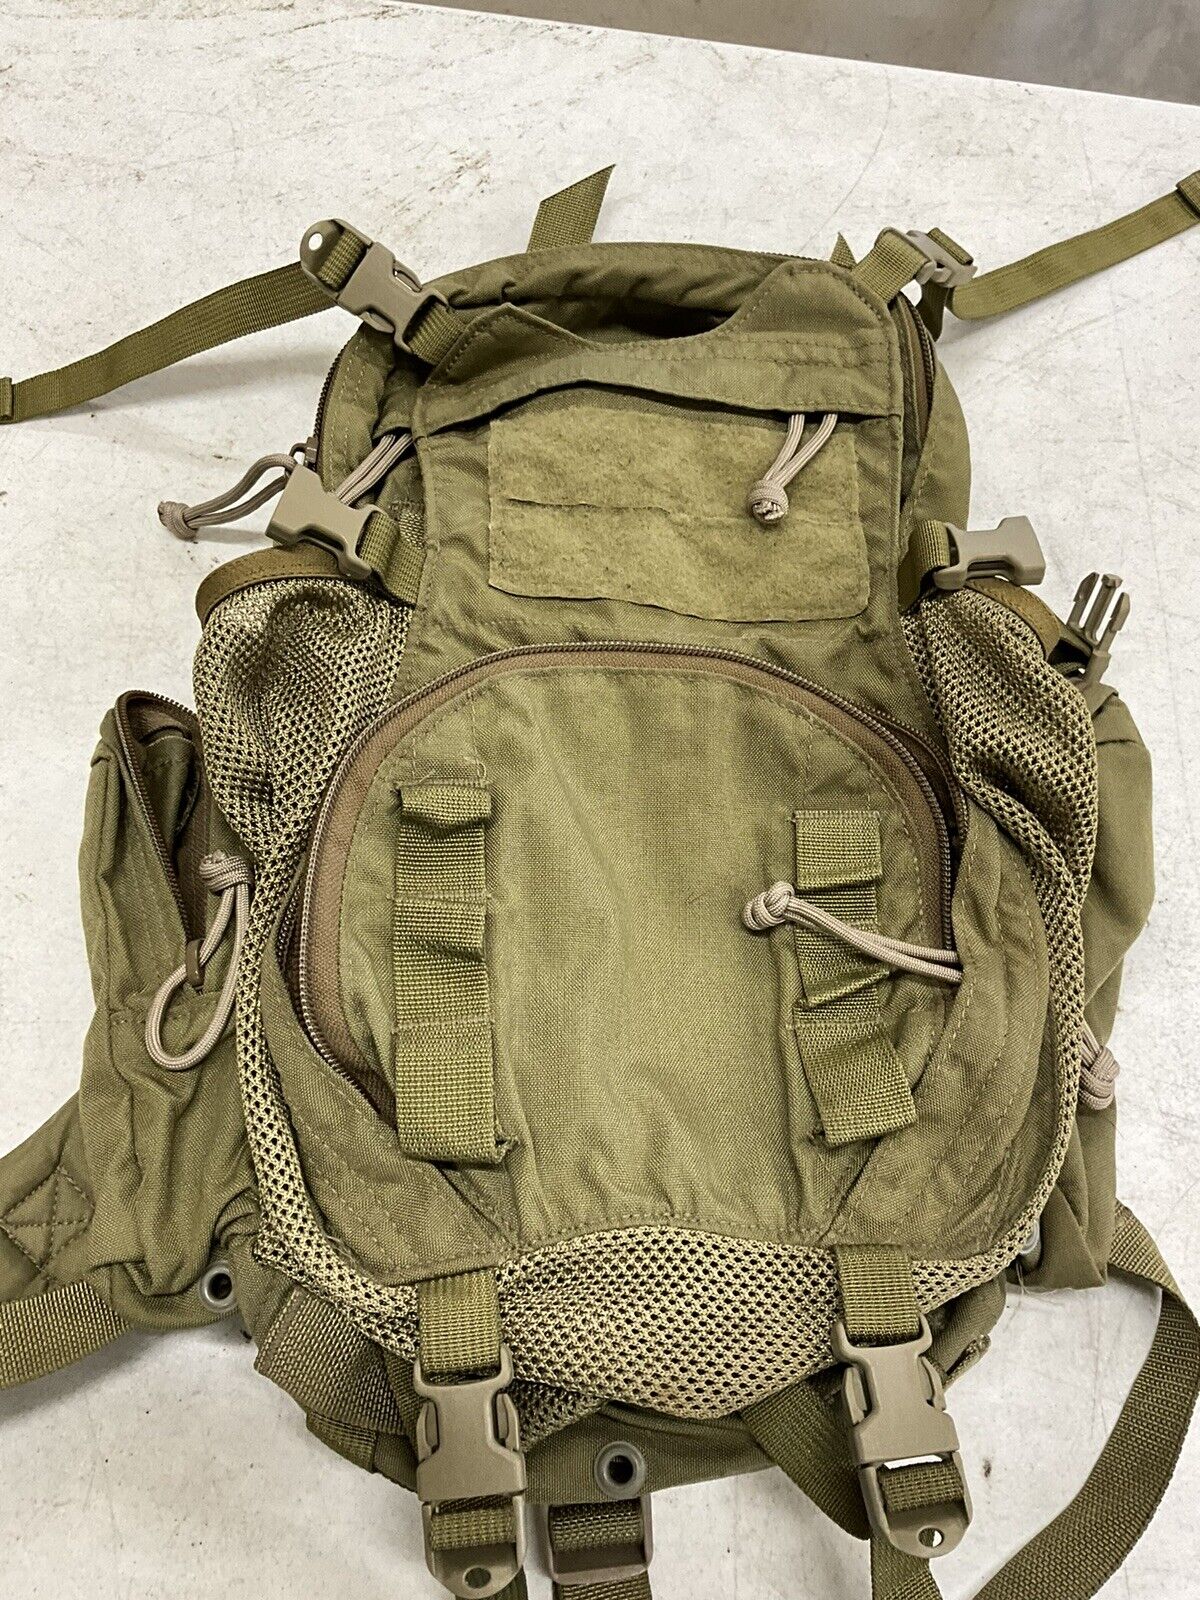 EAGLE INDUSTRIES YOTE BEAVER TAIL ASSAULT PACK